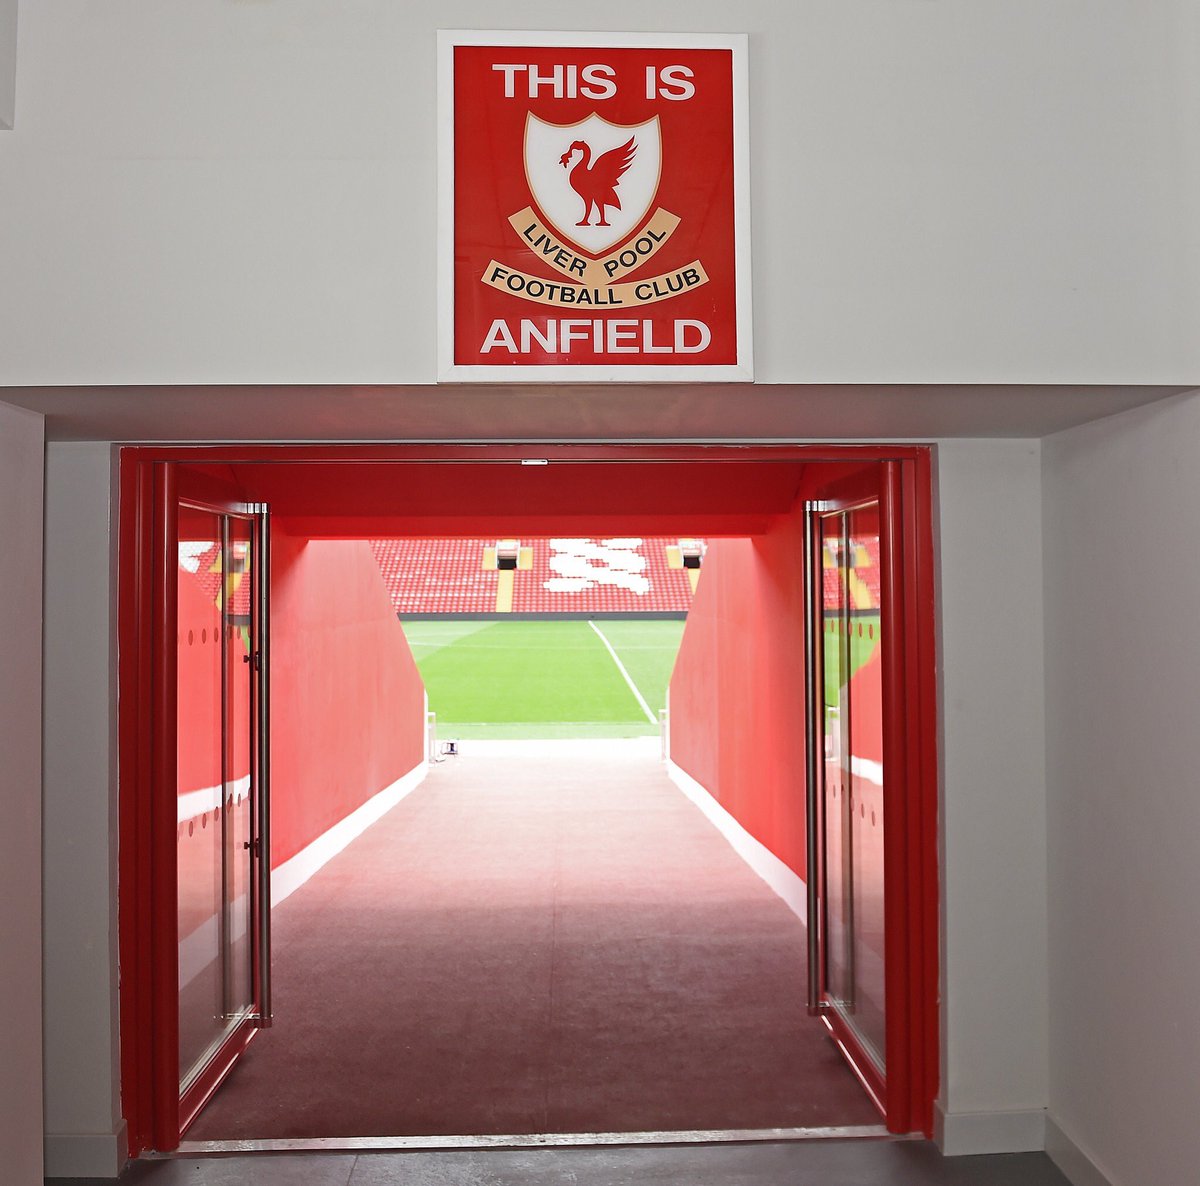 Lfc Transfer Room Take A Look At The Remodeled Anfield Tunnel With The Iconic This Is Anfield Sign Thoughts Lfc Ynwa